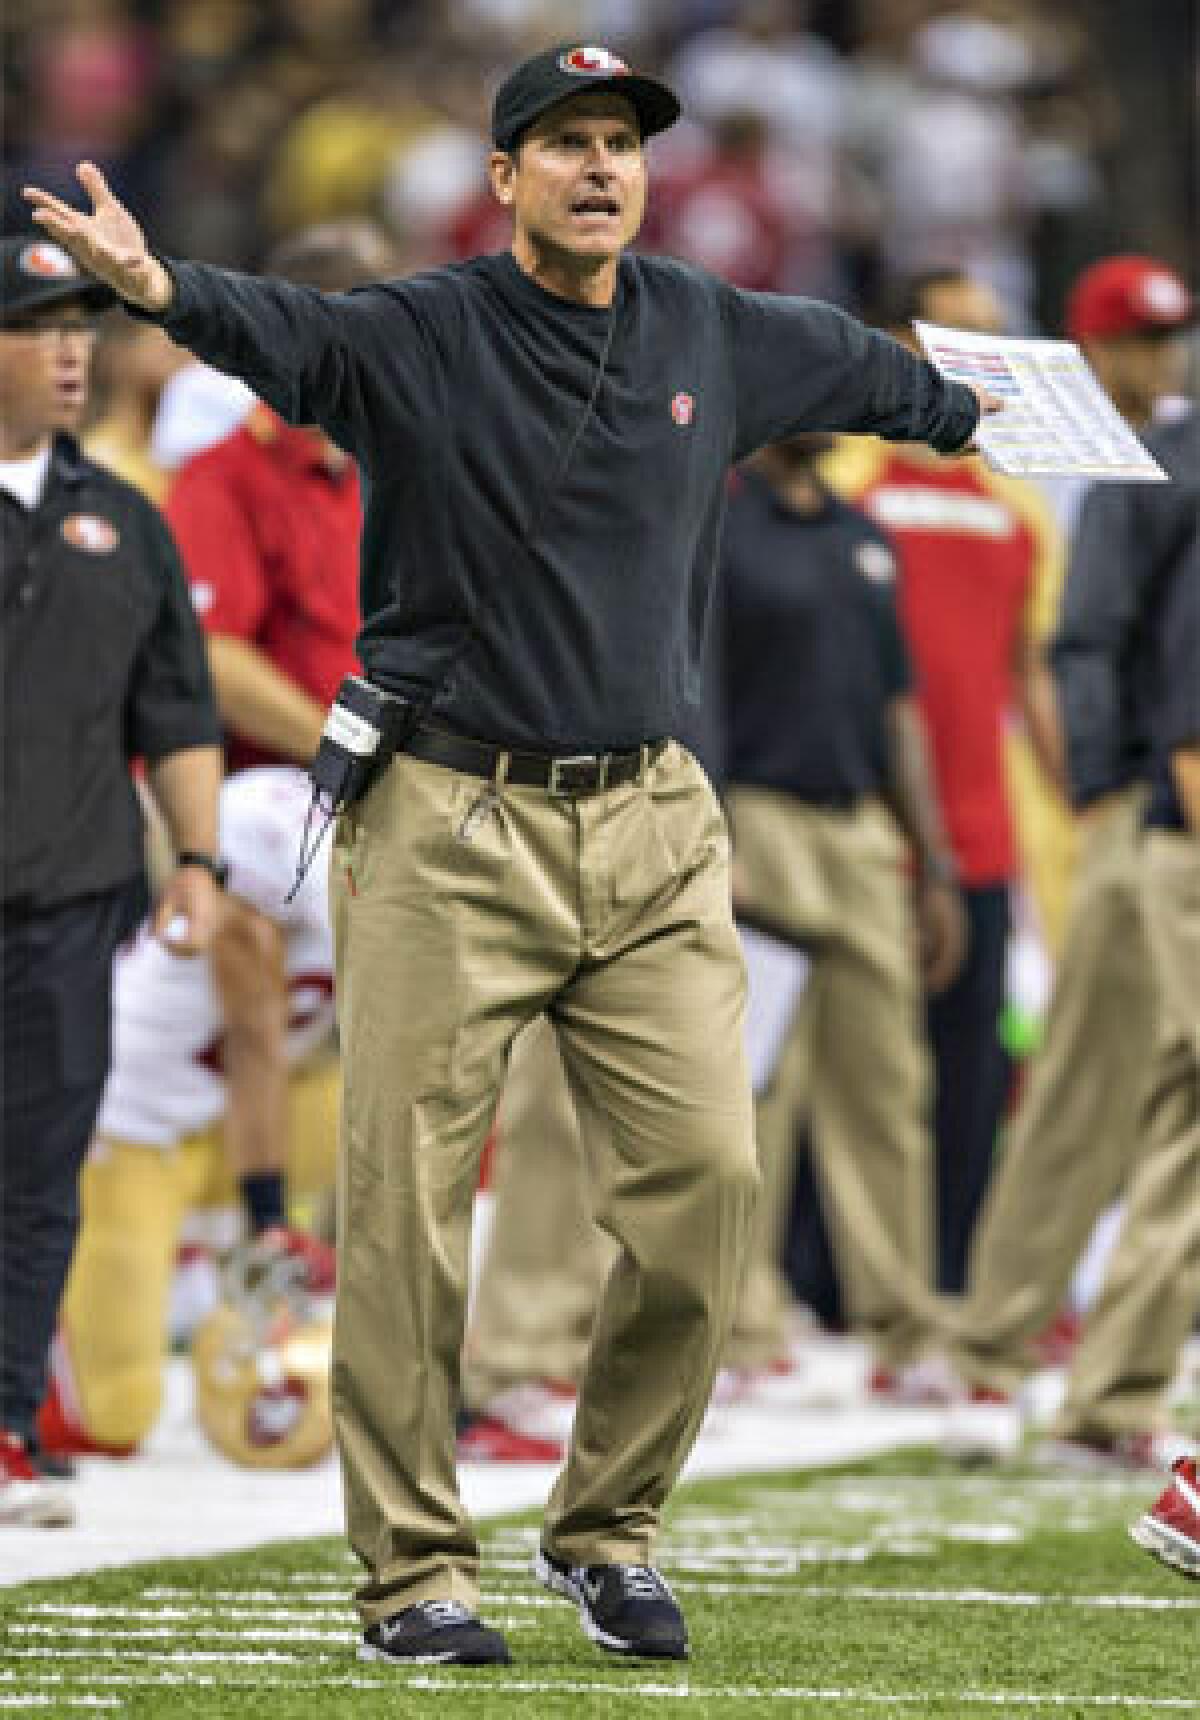 San Francisco Coach Jim Harbaugh sticks to a tried-and-true outfit -- a black sweatshirt tucked into pleated khakis.